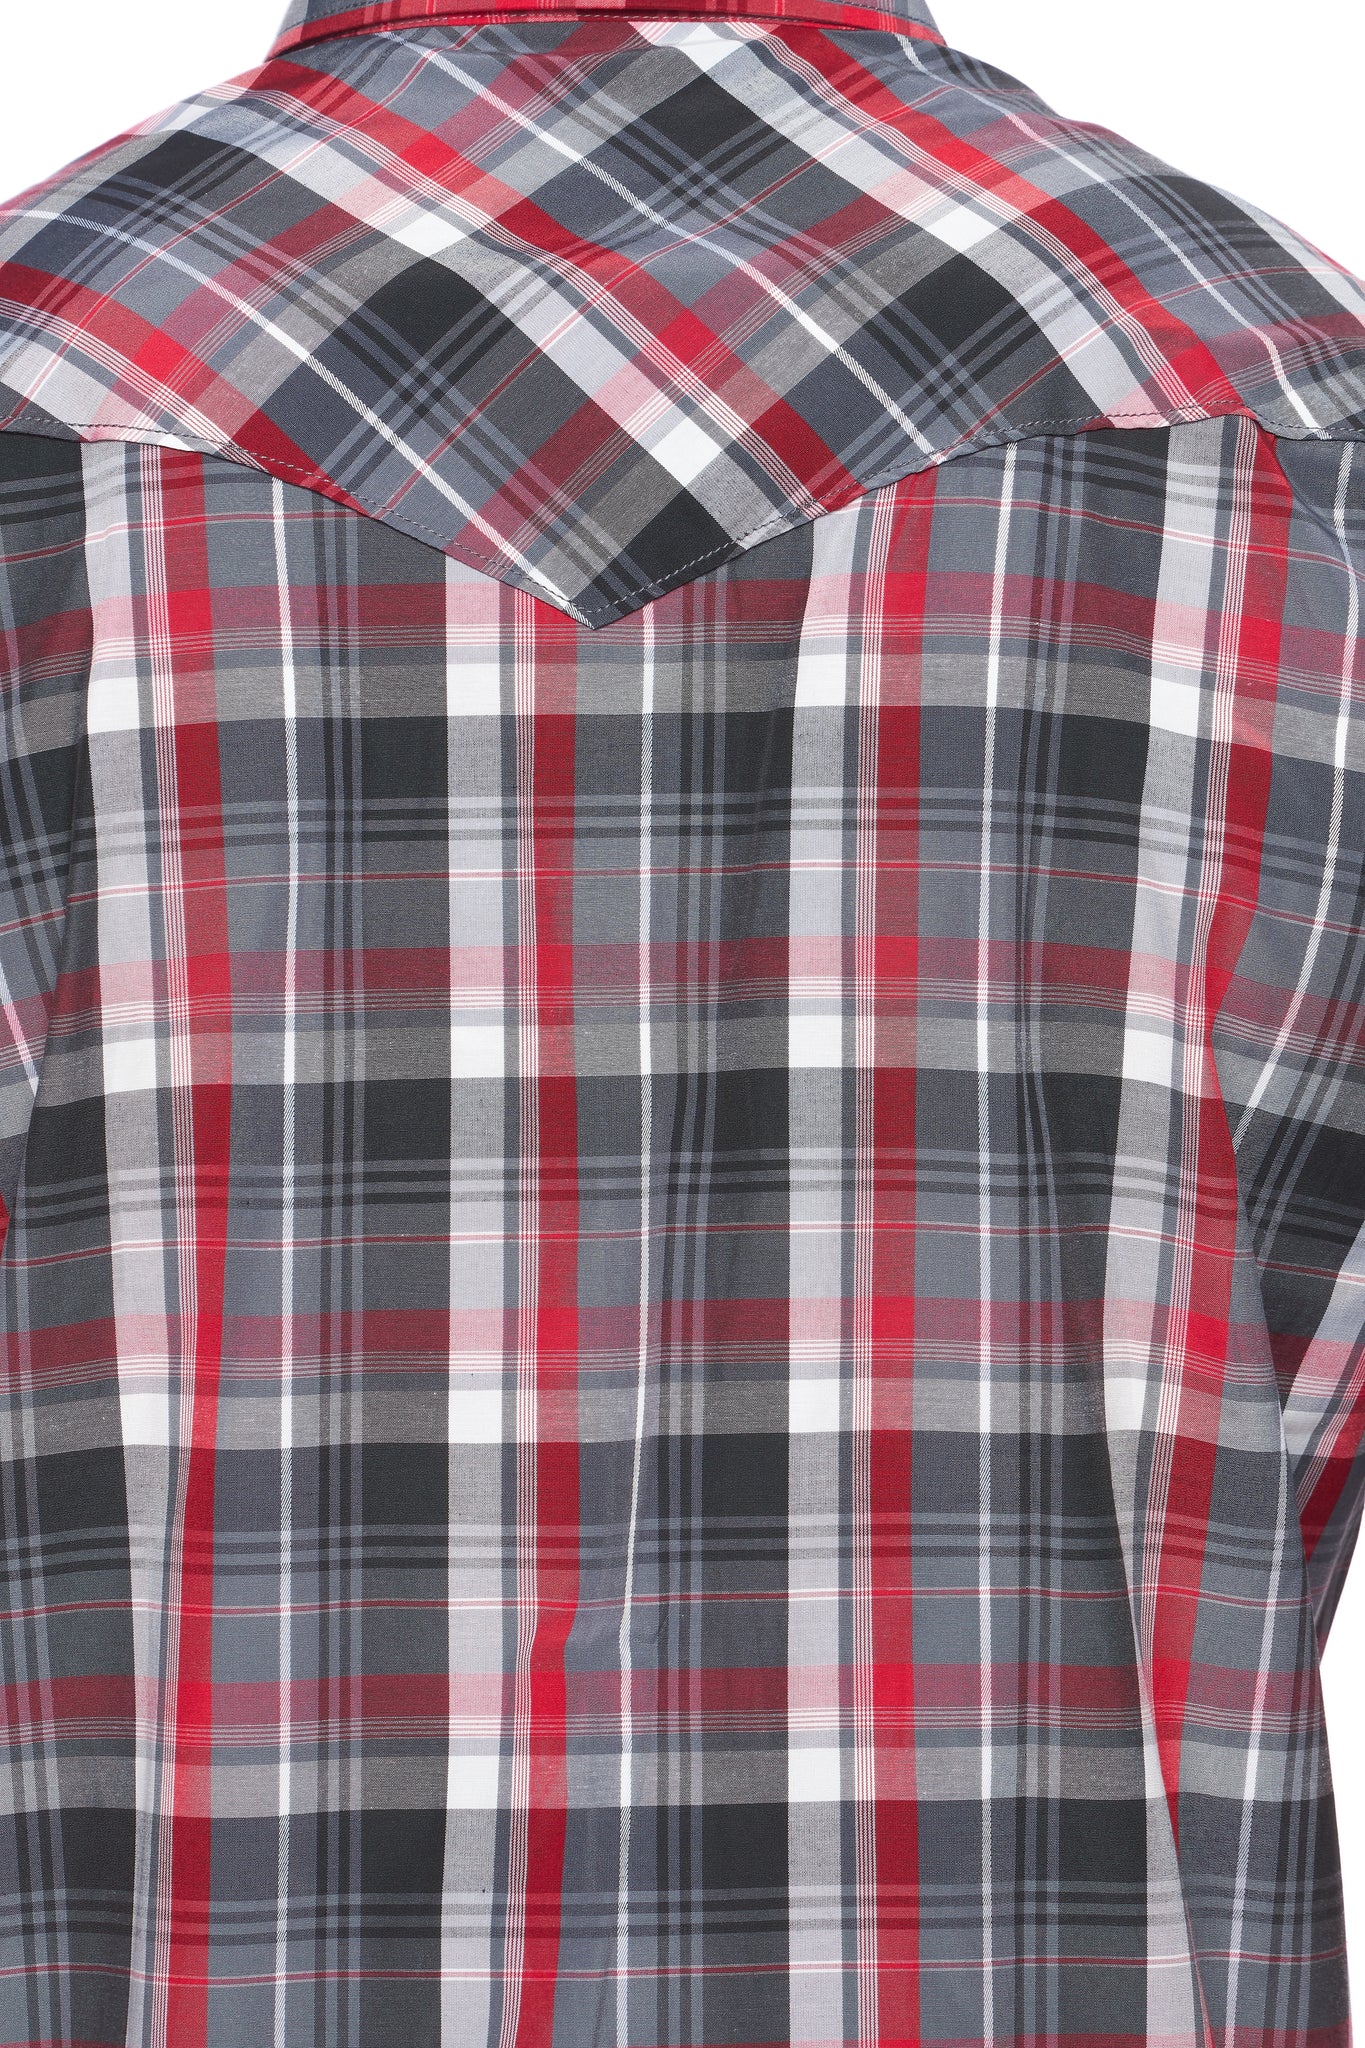 Men's Western Short Sleeve Plaid Shirts With Snap Buttons